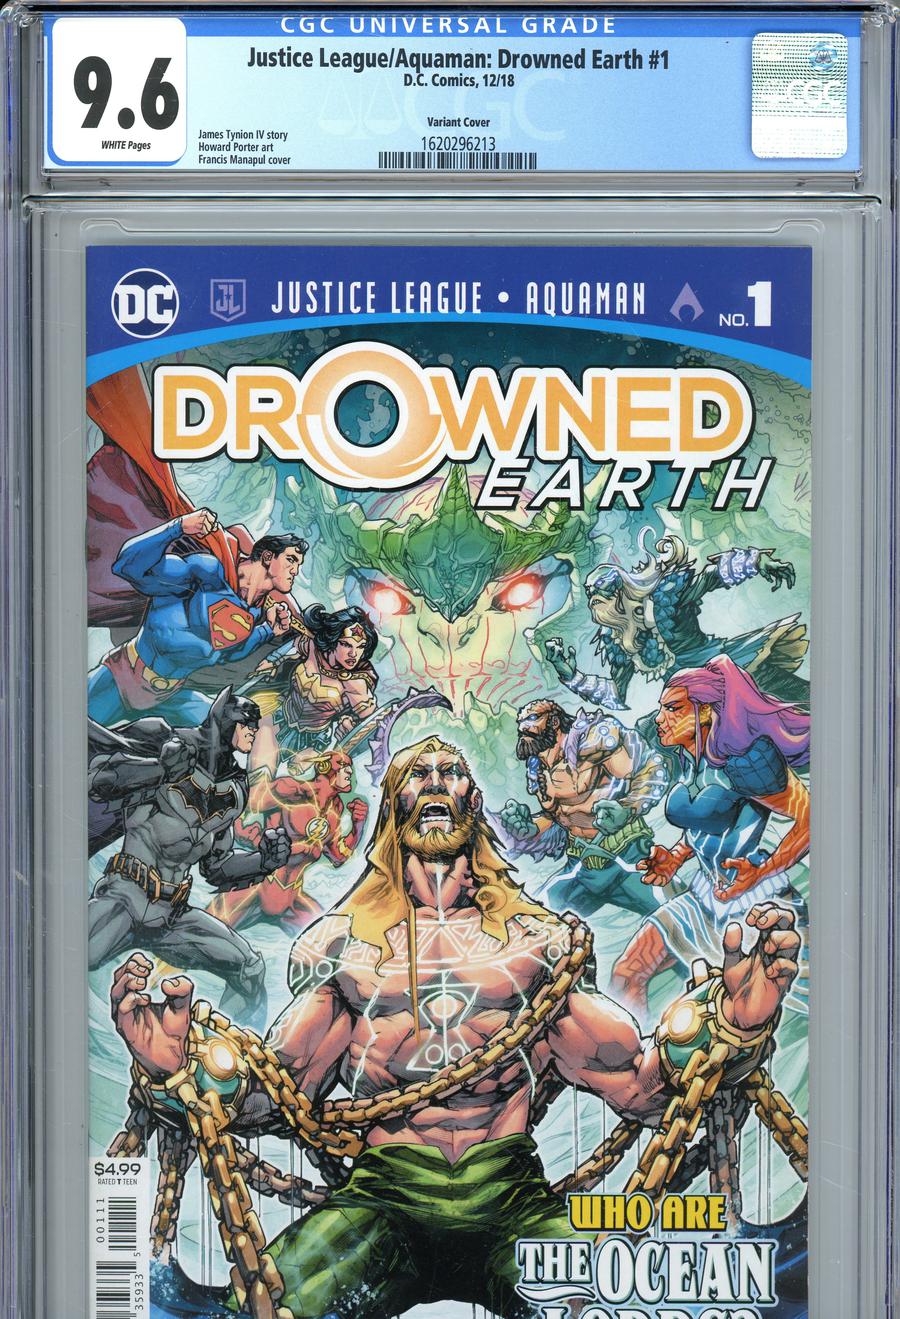 Justice League Aquaman Drowned Earth #1 Cover F DF CGC Graded (Drowned Earth Part 1)